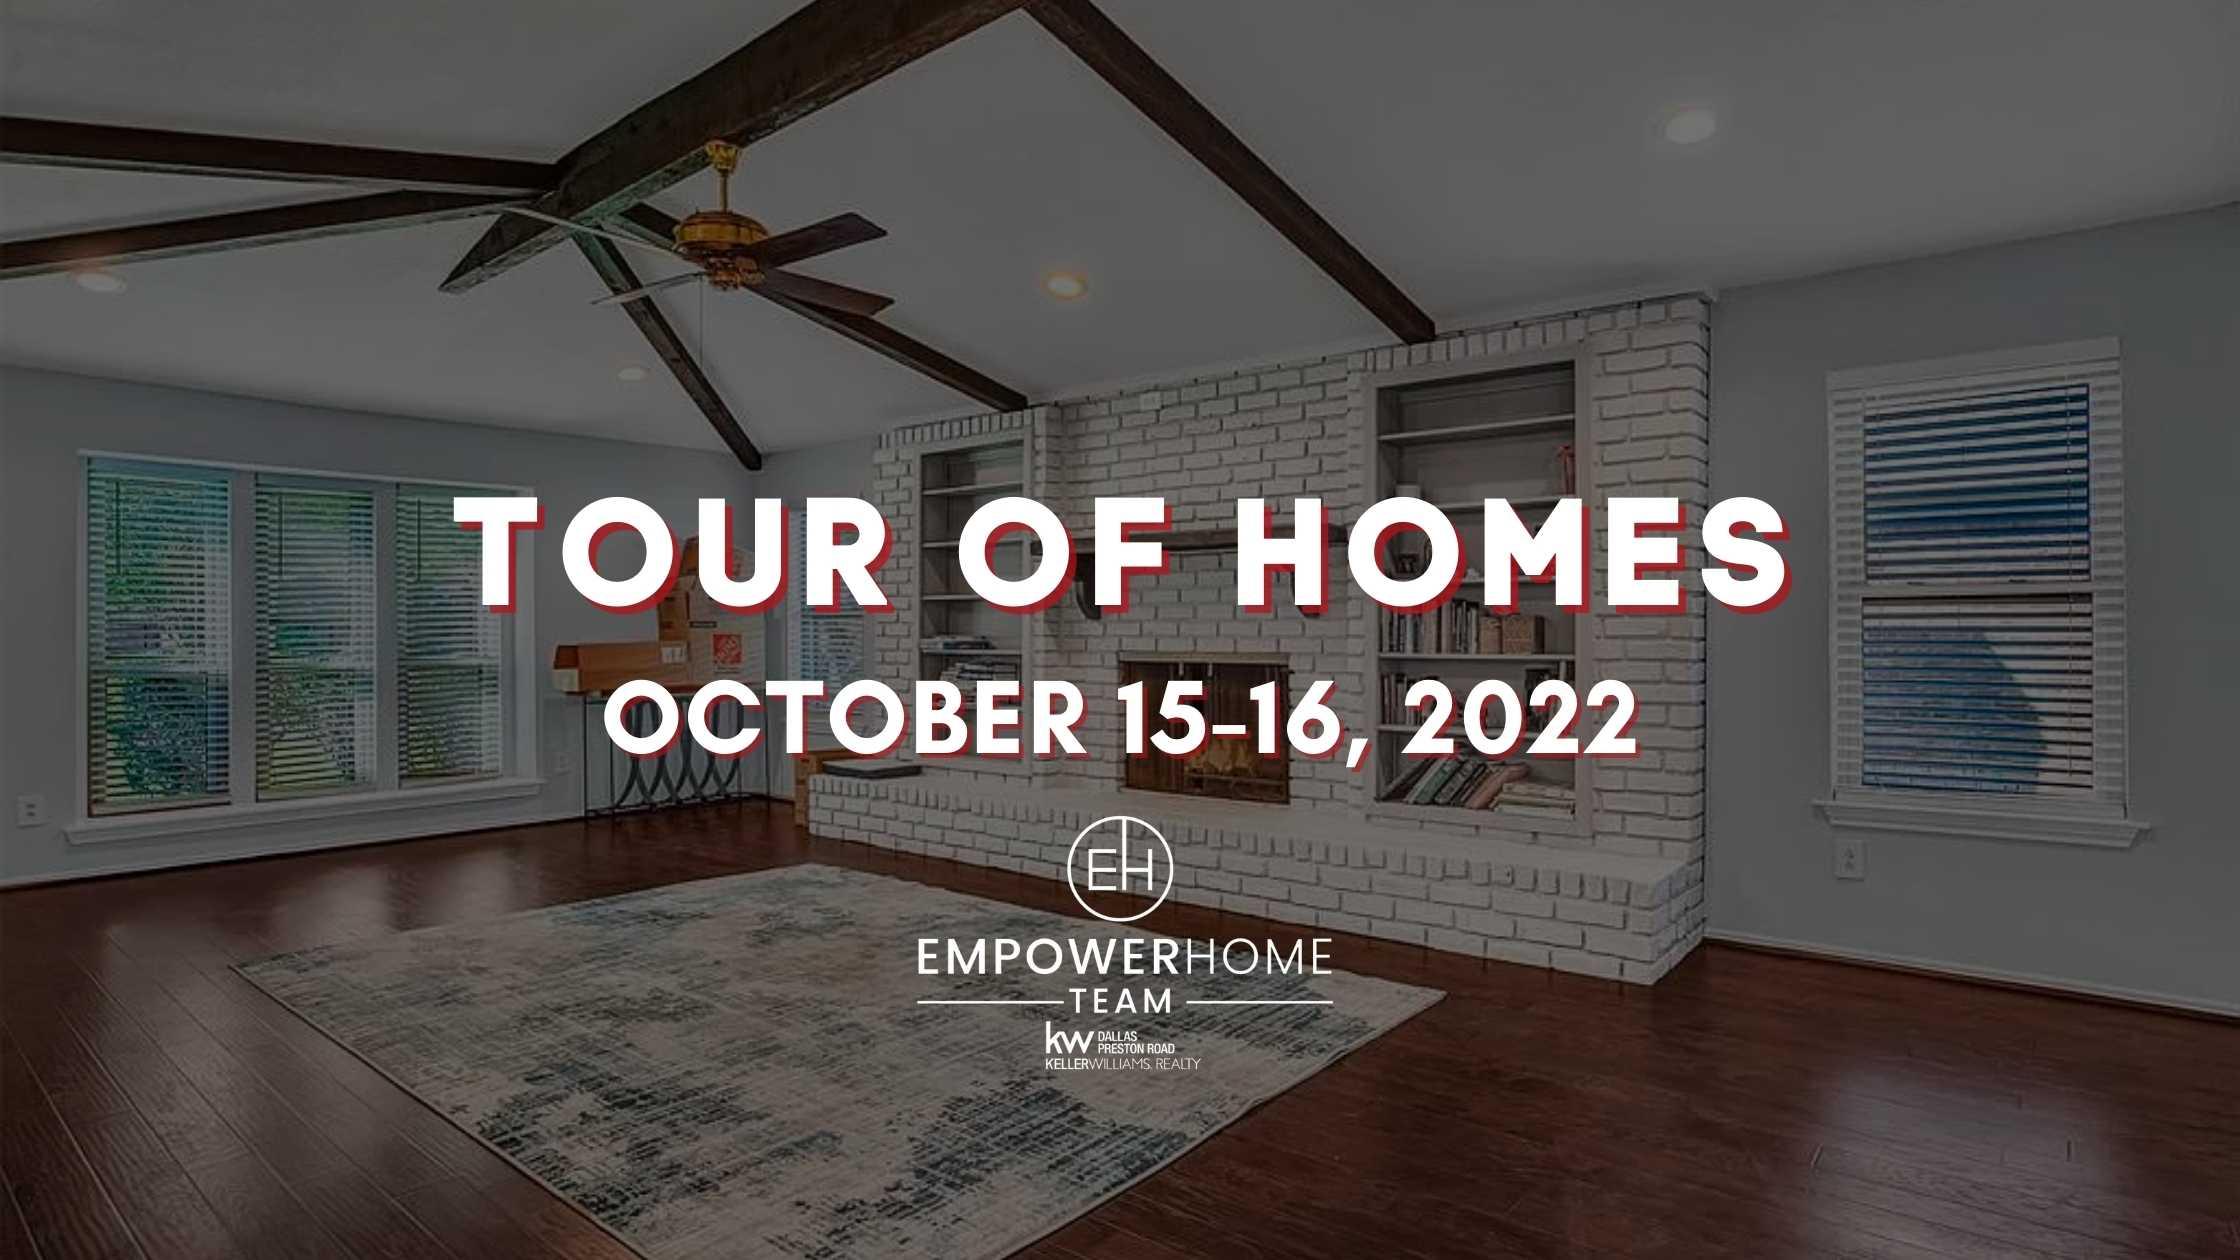 Dallas Tour of Homes Oct. 15-16